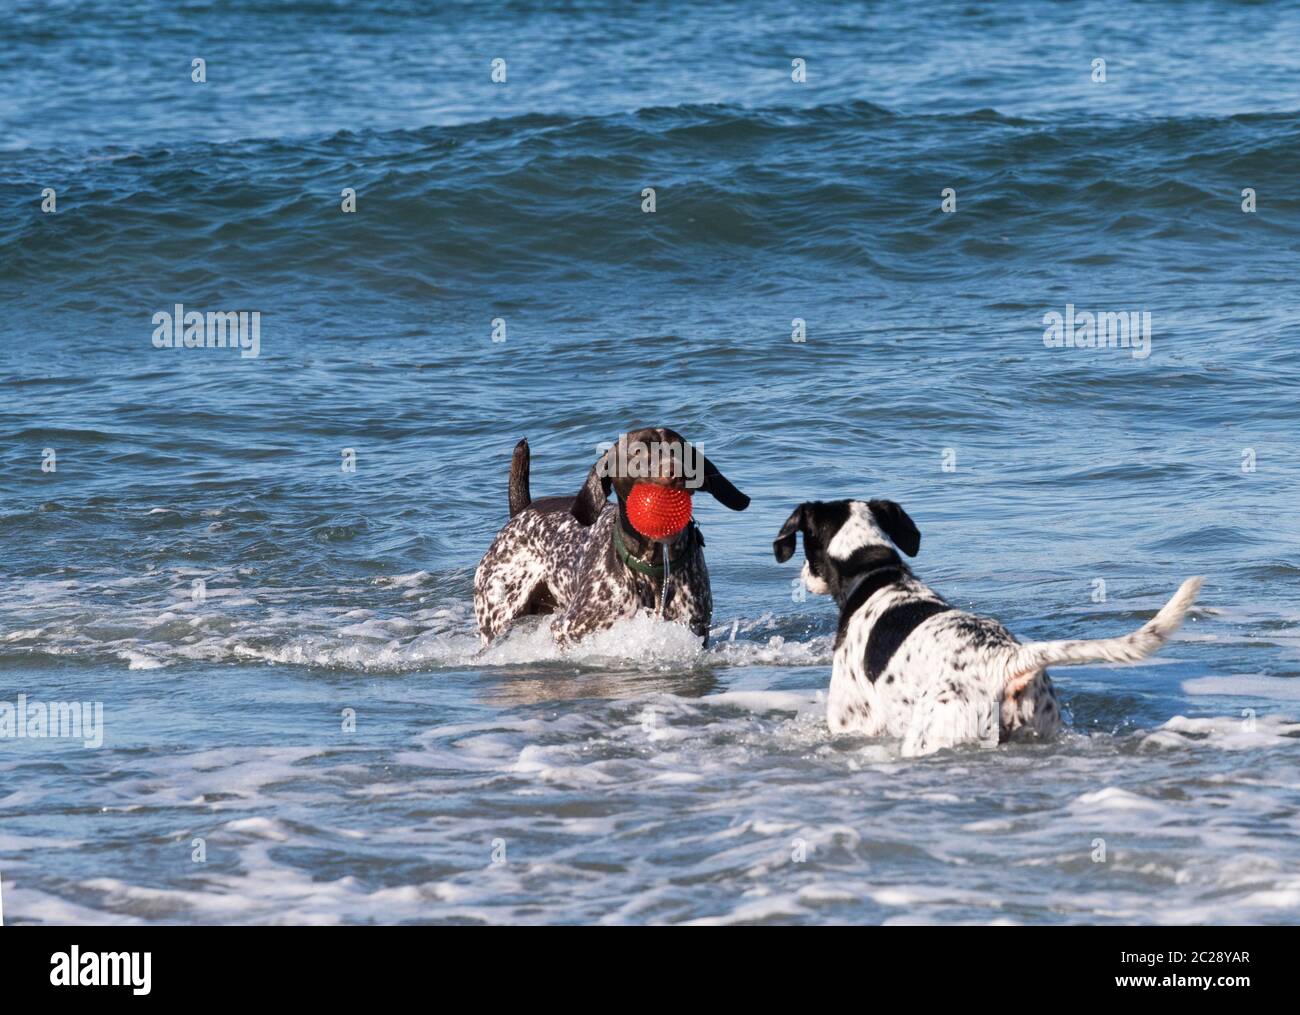 Two Dogs Playing with a Red Ball in the Ocean Stock Photo